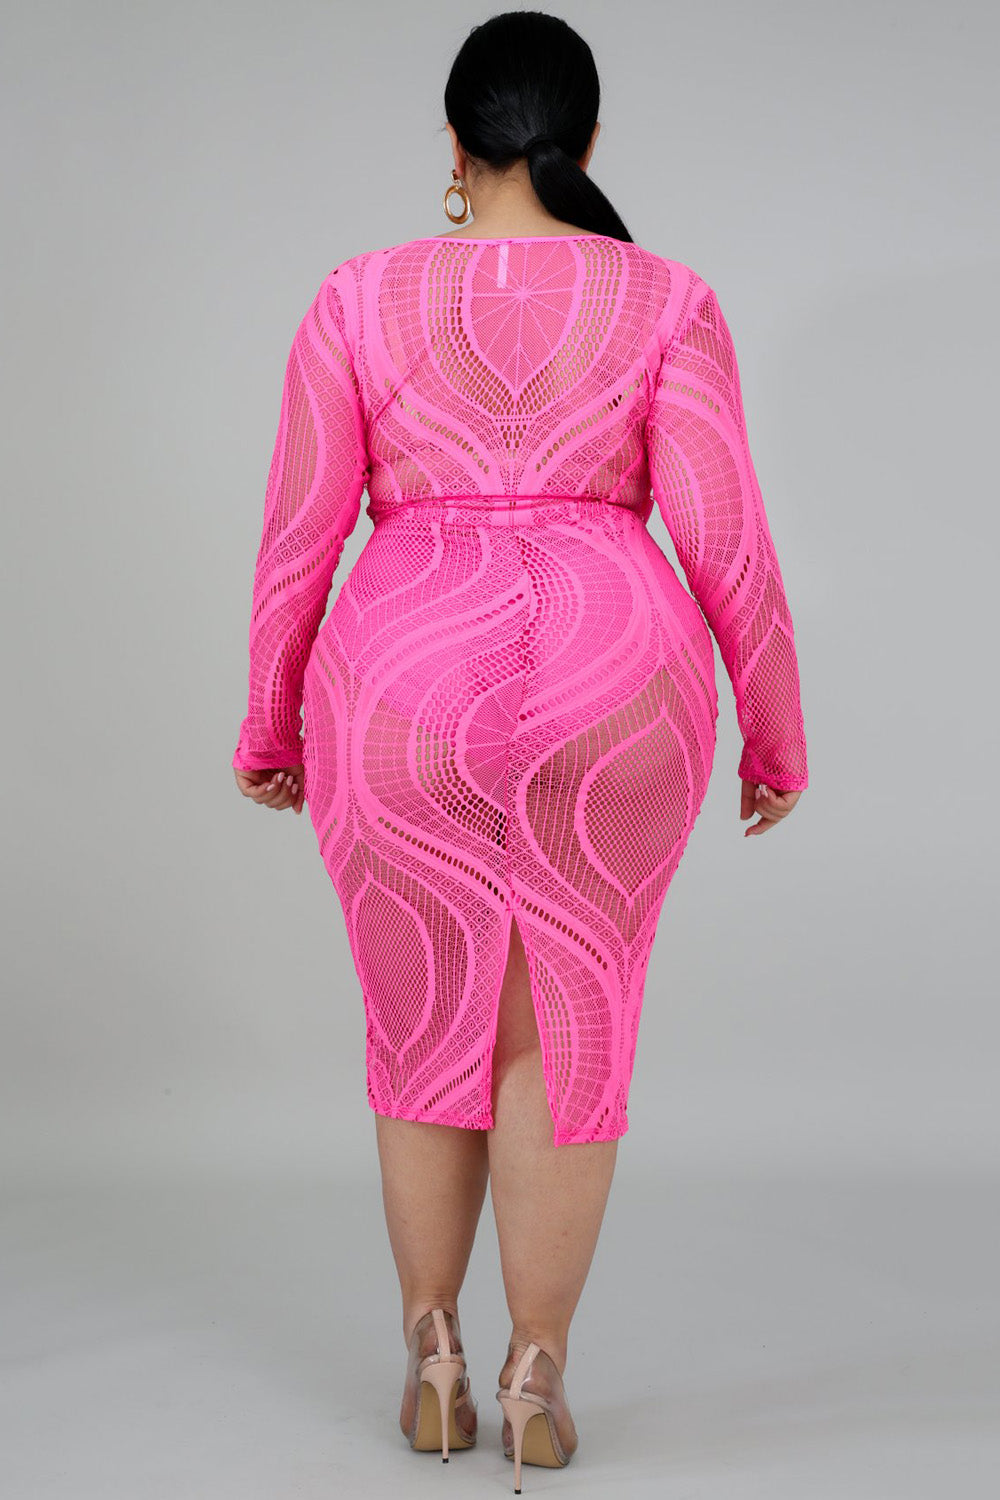 goPals sexy off the shoulder fuchsia plus size sheer lace dress. 